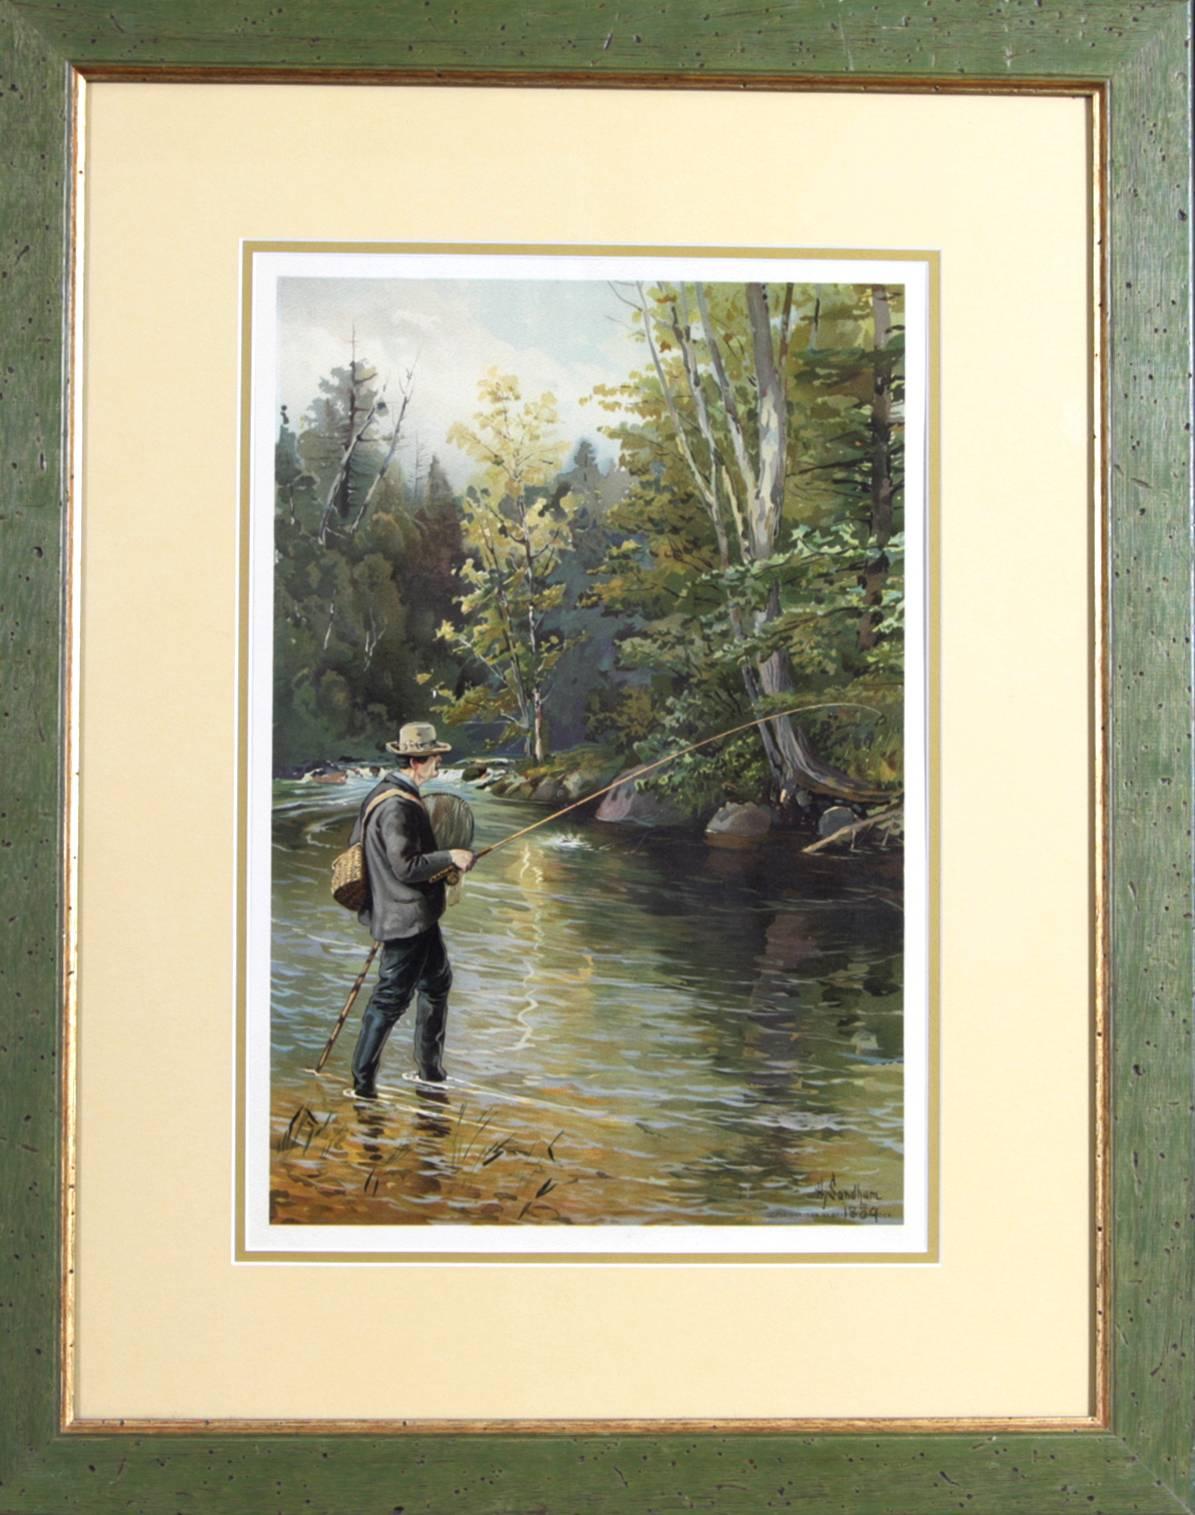 Henry Sandham Print - Trout Fishing from "Sport or Fishing and Shooting" ( 1889- 1890) chromolithgraph